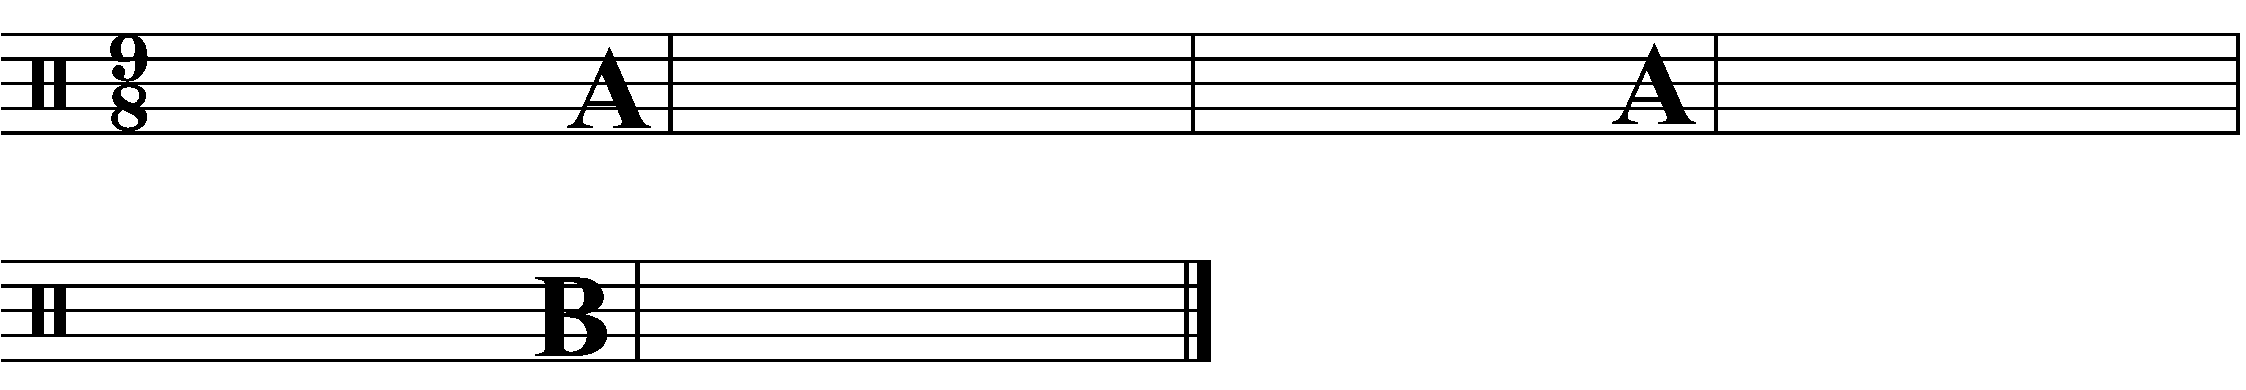 A six bar phrase made up of three 2 bar section.